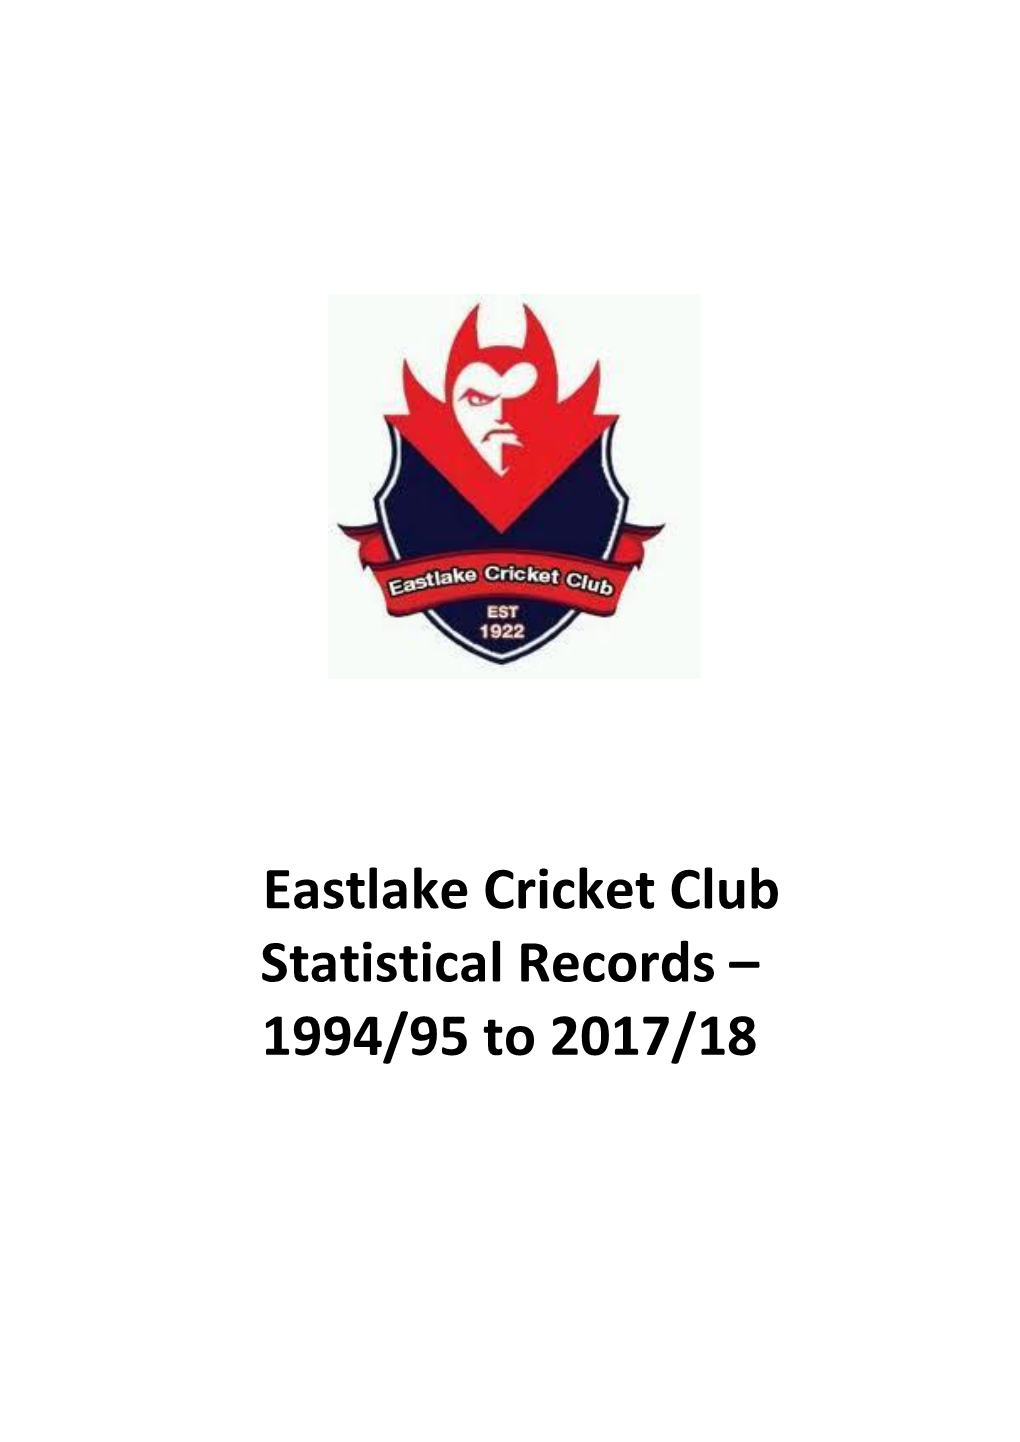 Eastlake Cricket Club Statistical Records – 1994/95 to 2017/18